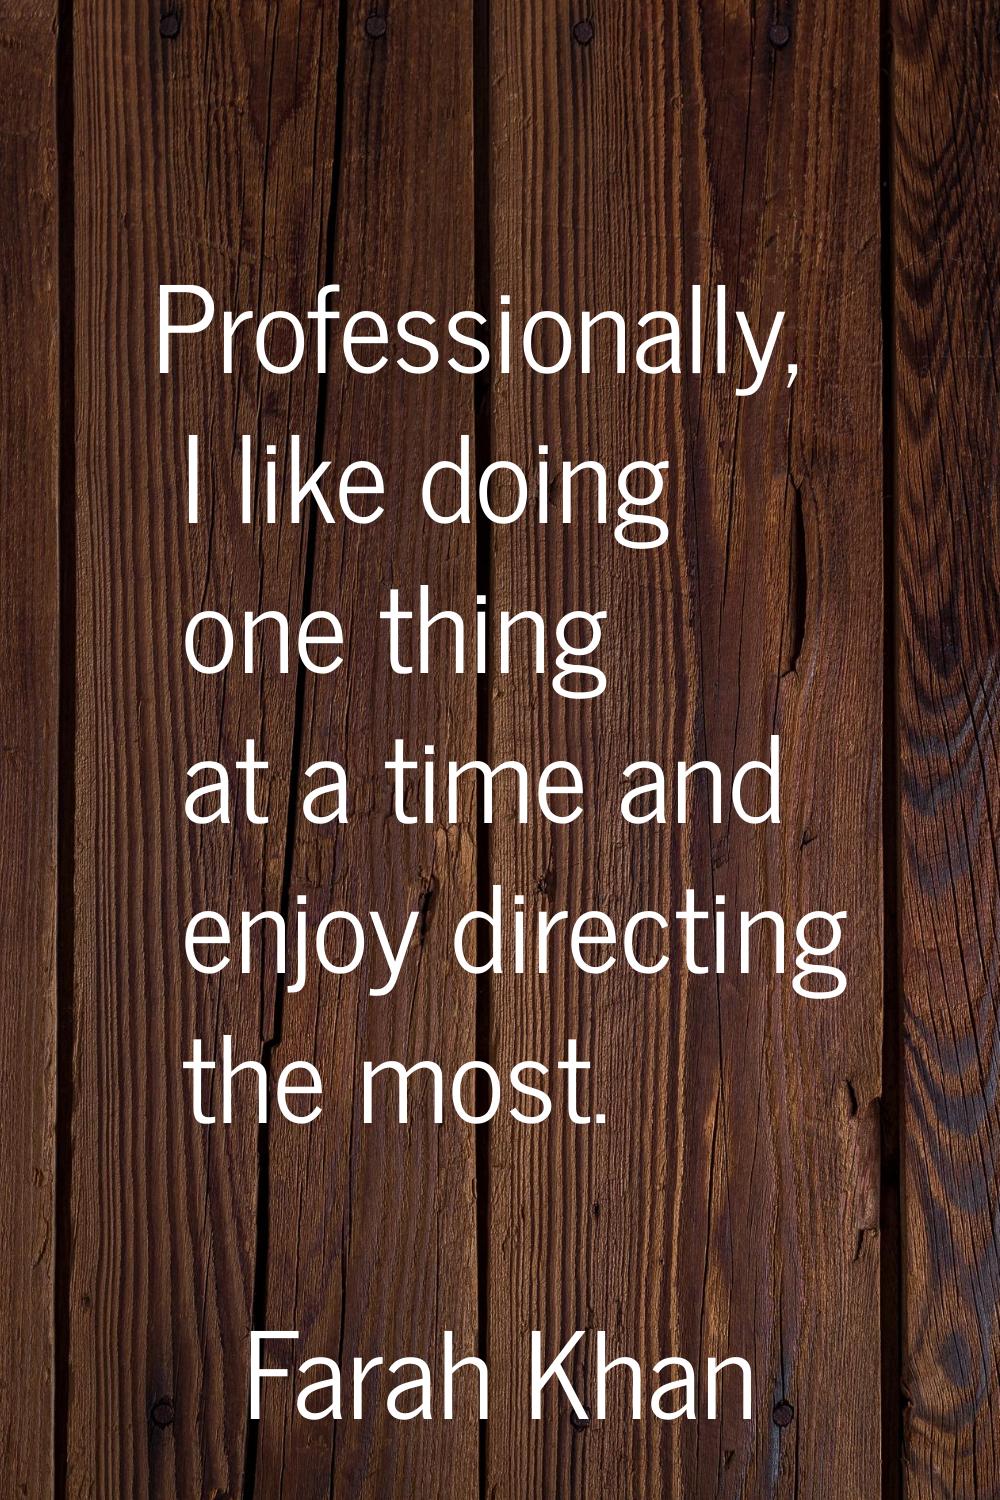 Professionally, I like doing one thing at a time and enjoy directing the most.